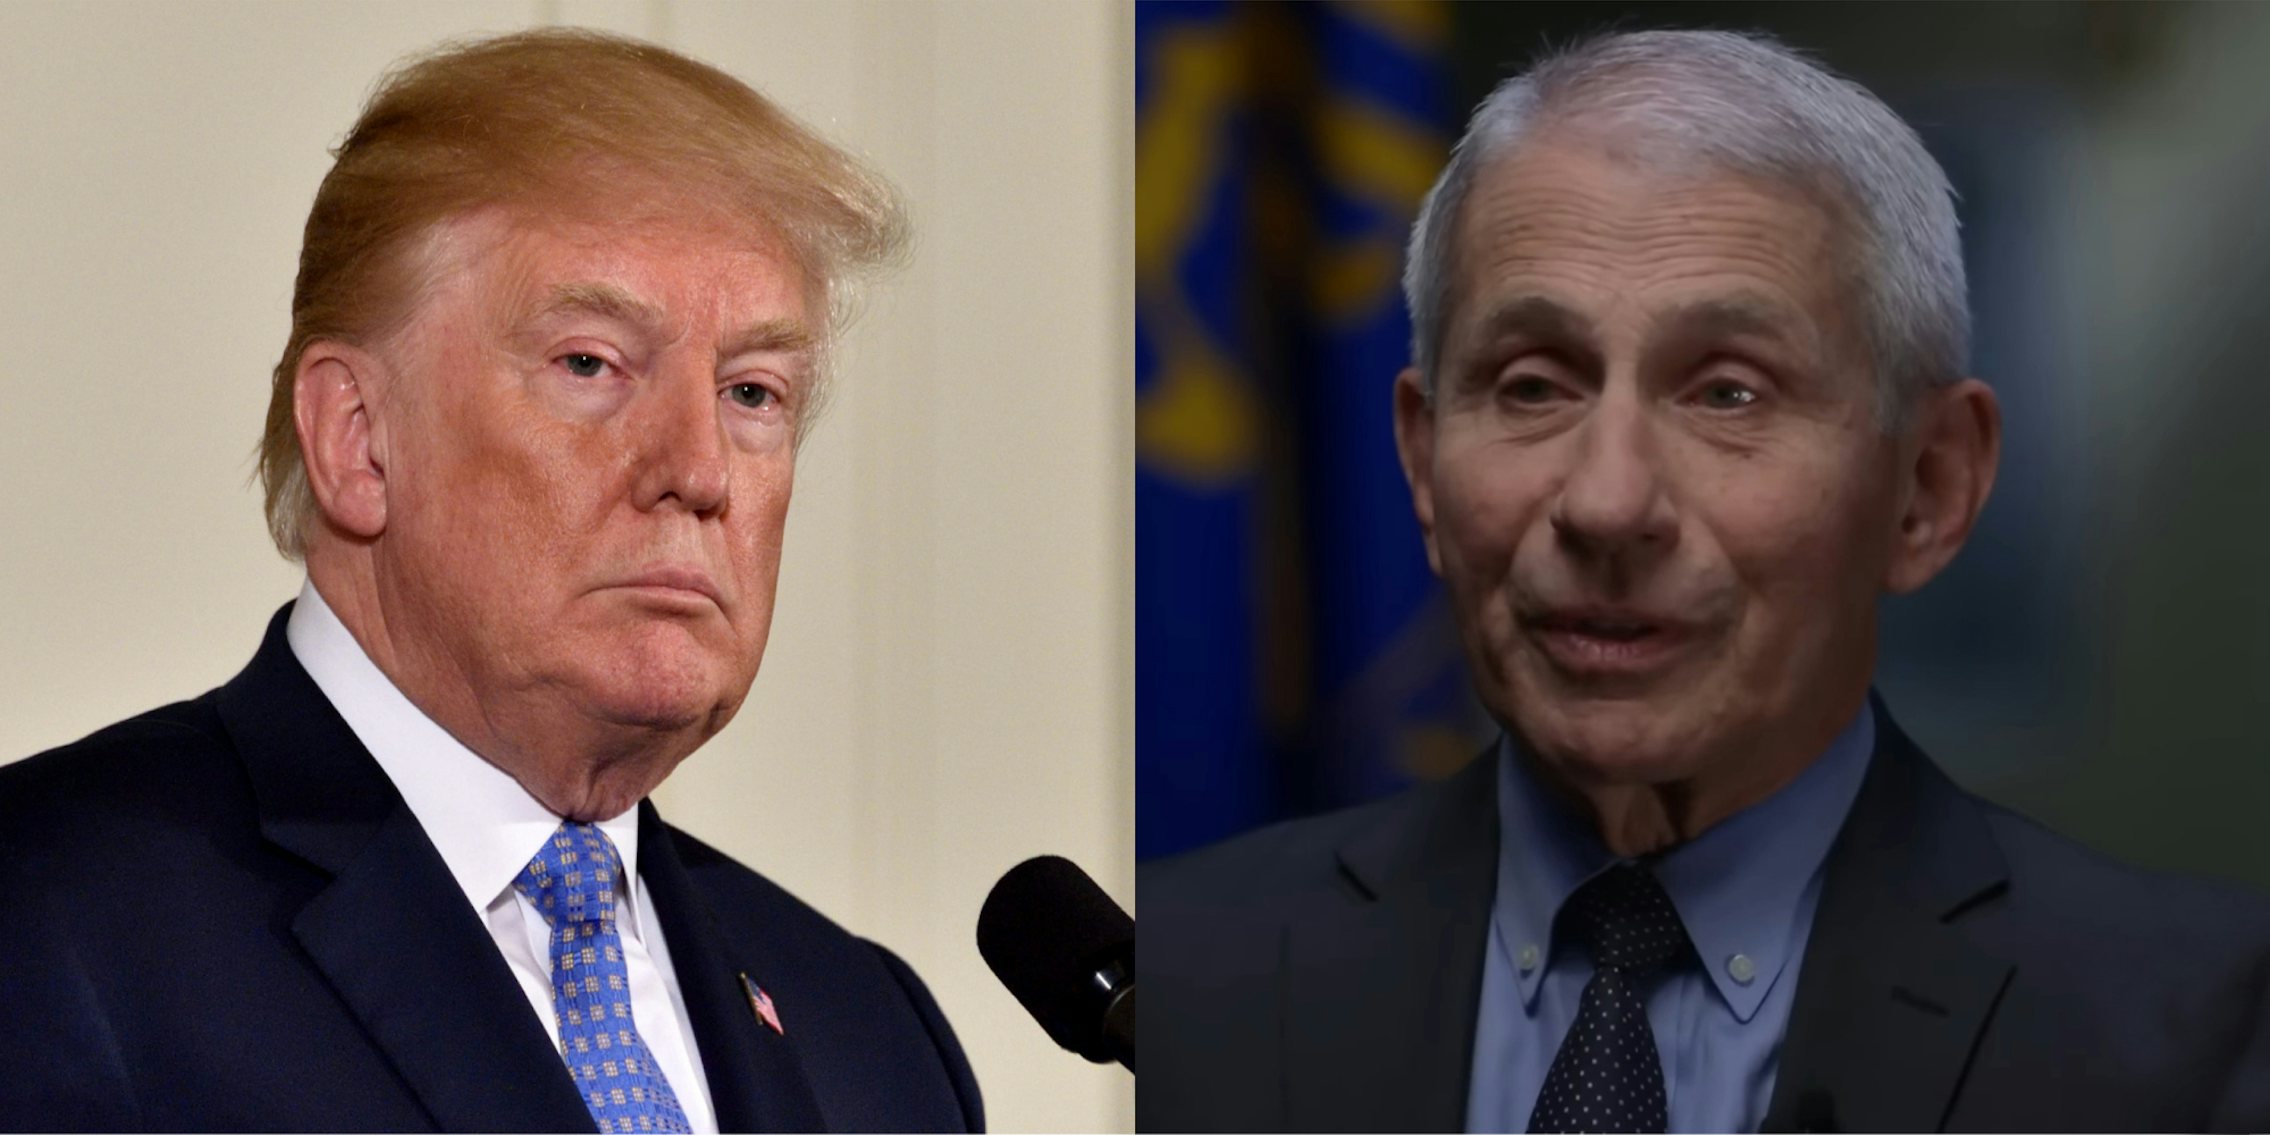 Donald Trump in front of tan background (l) Dr. Fauci in front of blurry background (r)